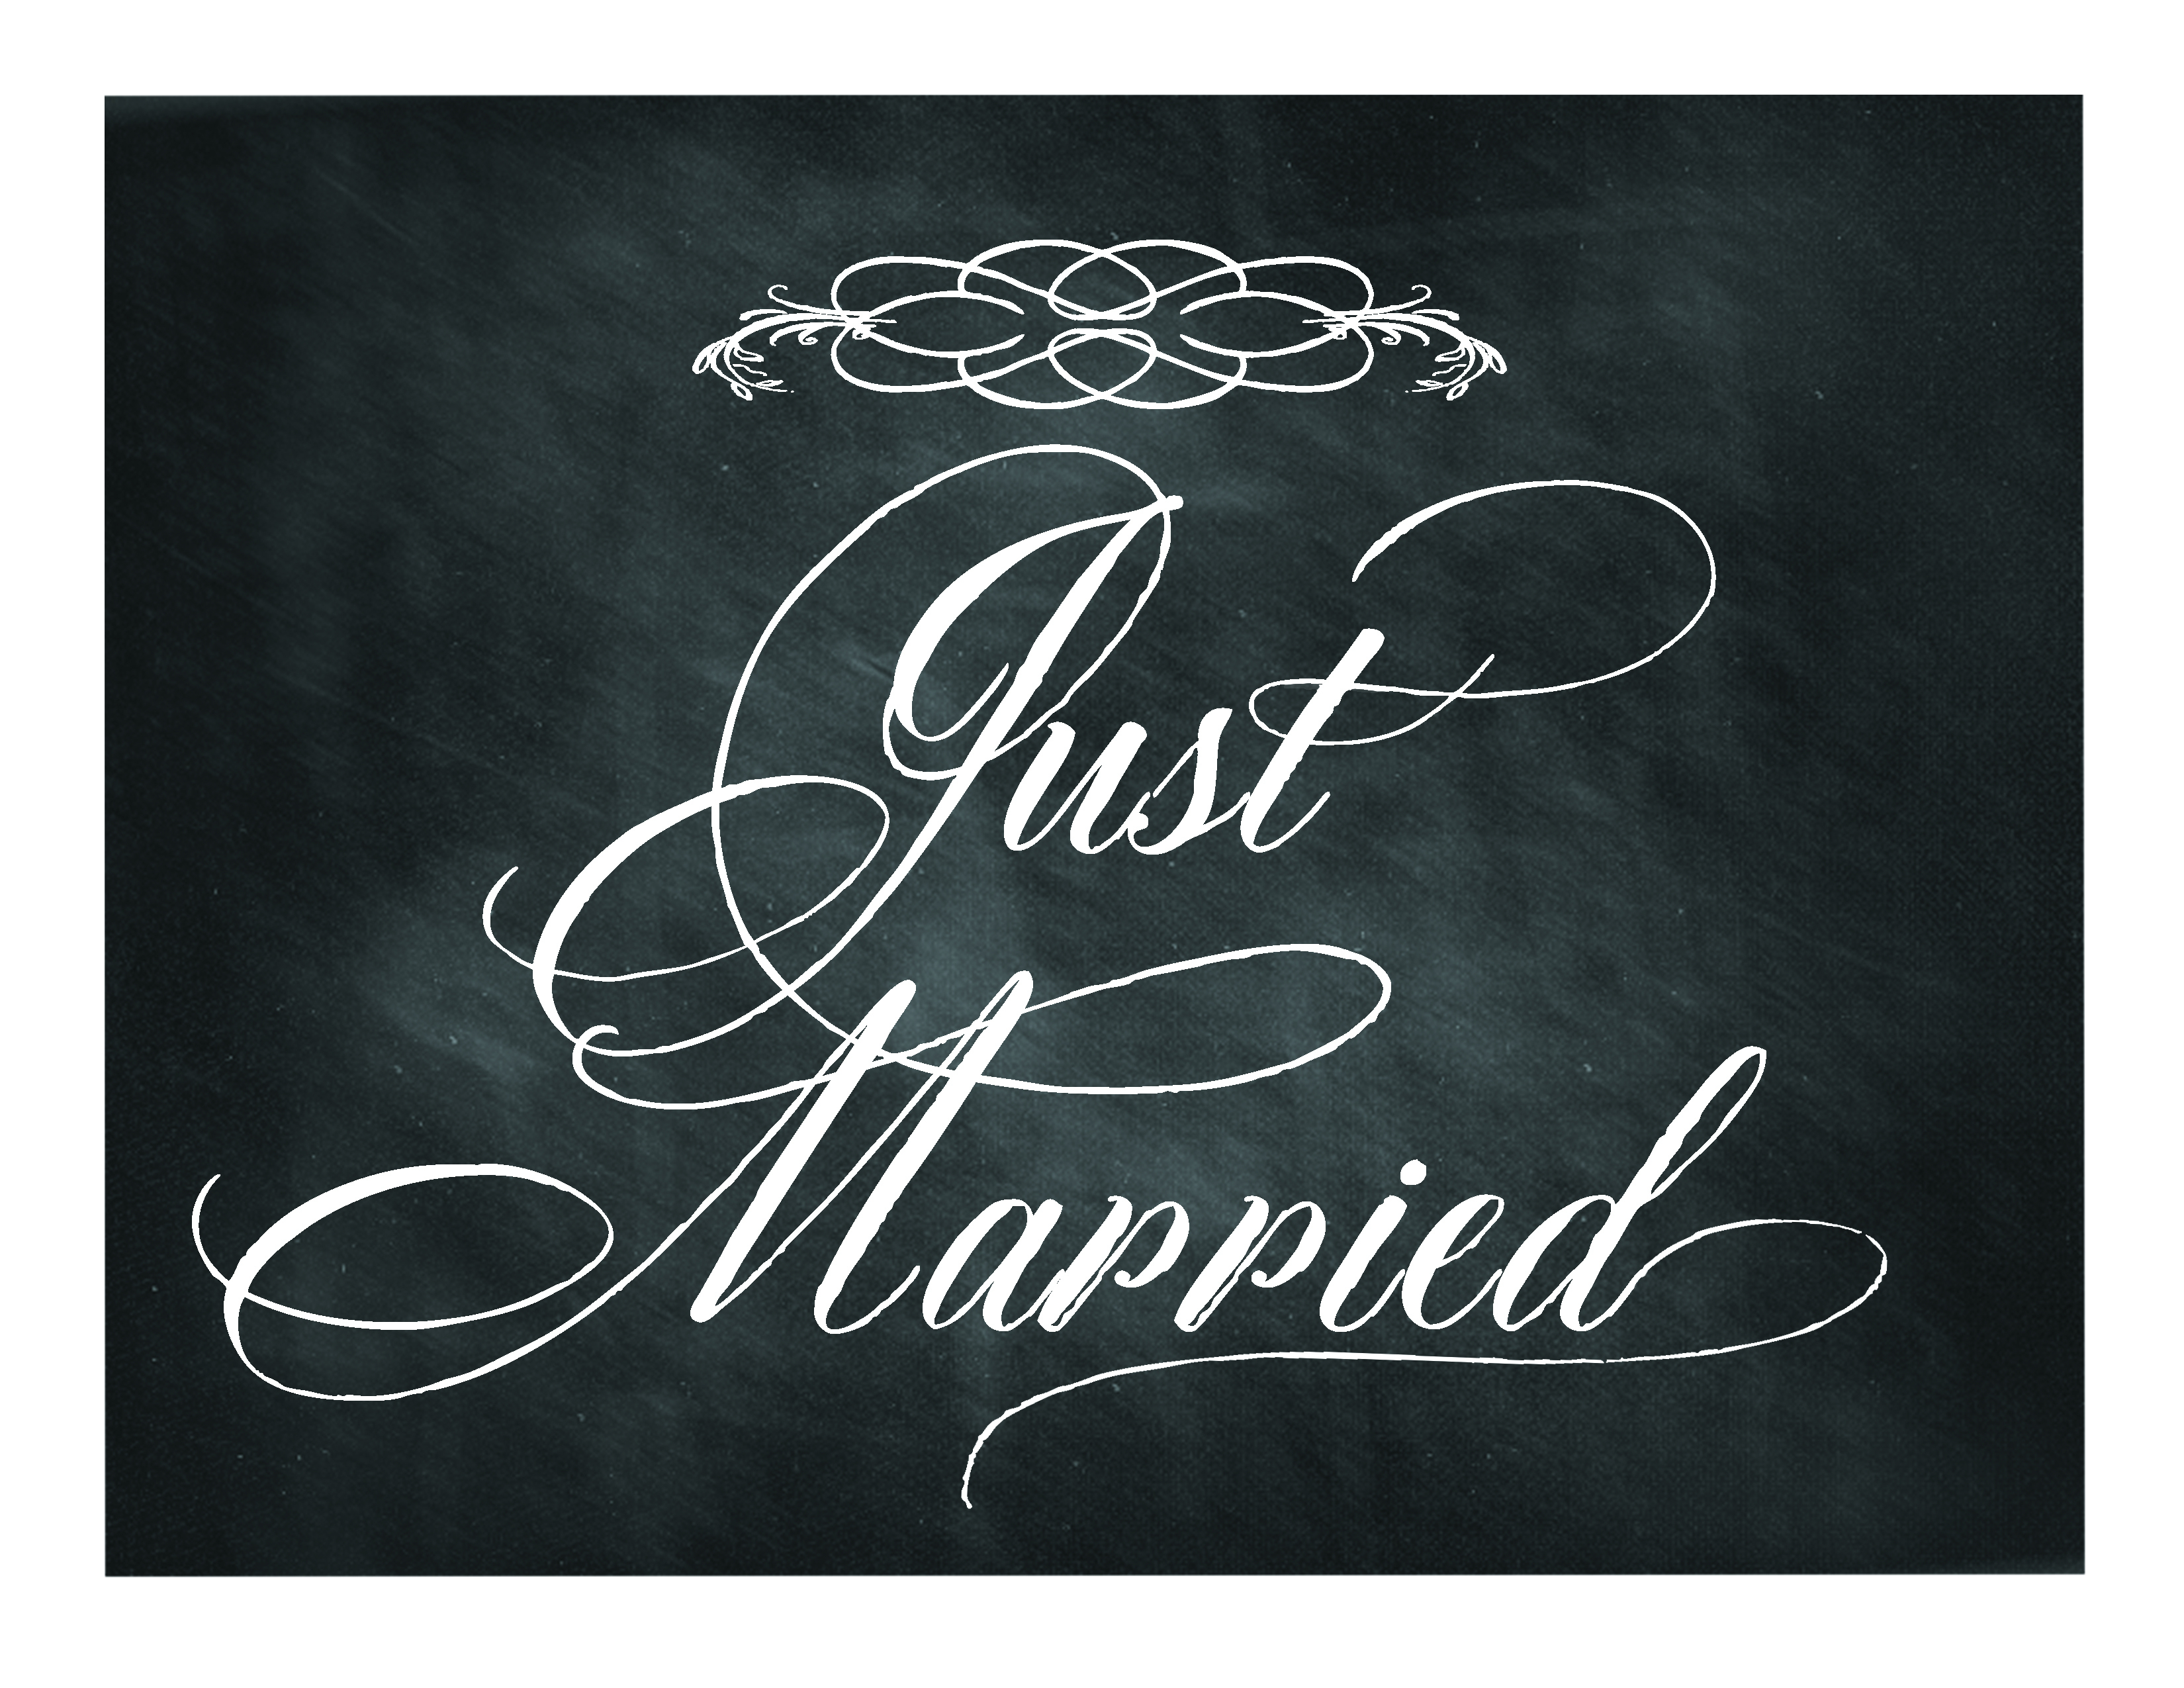 Free Printable Chalkboard Sign: Just Married | Lettering Art Studio - Just Married Free Printable